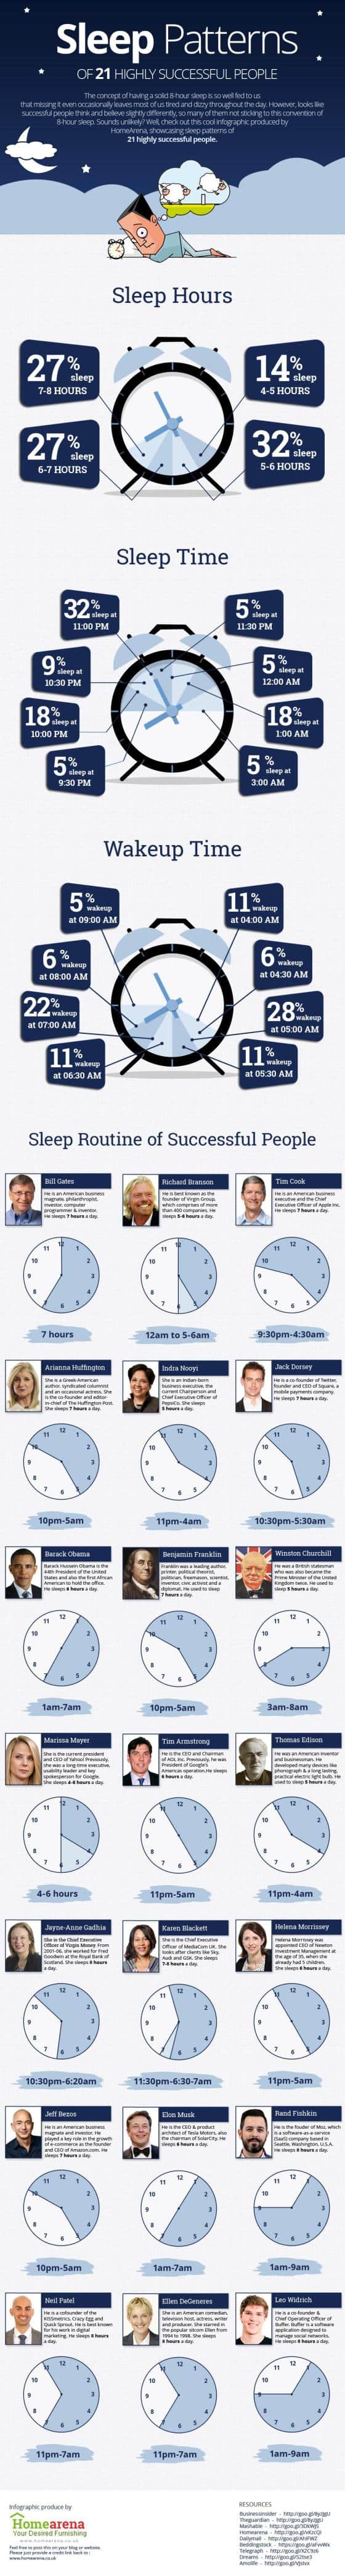 Sleep Patterns of Highly Successful People Infographic